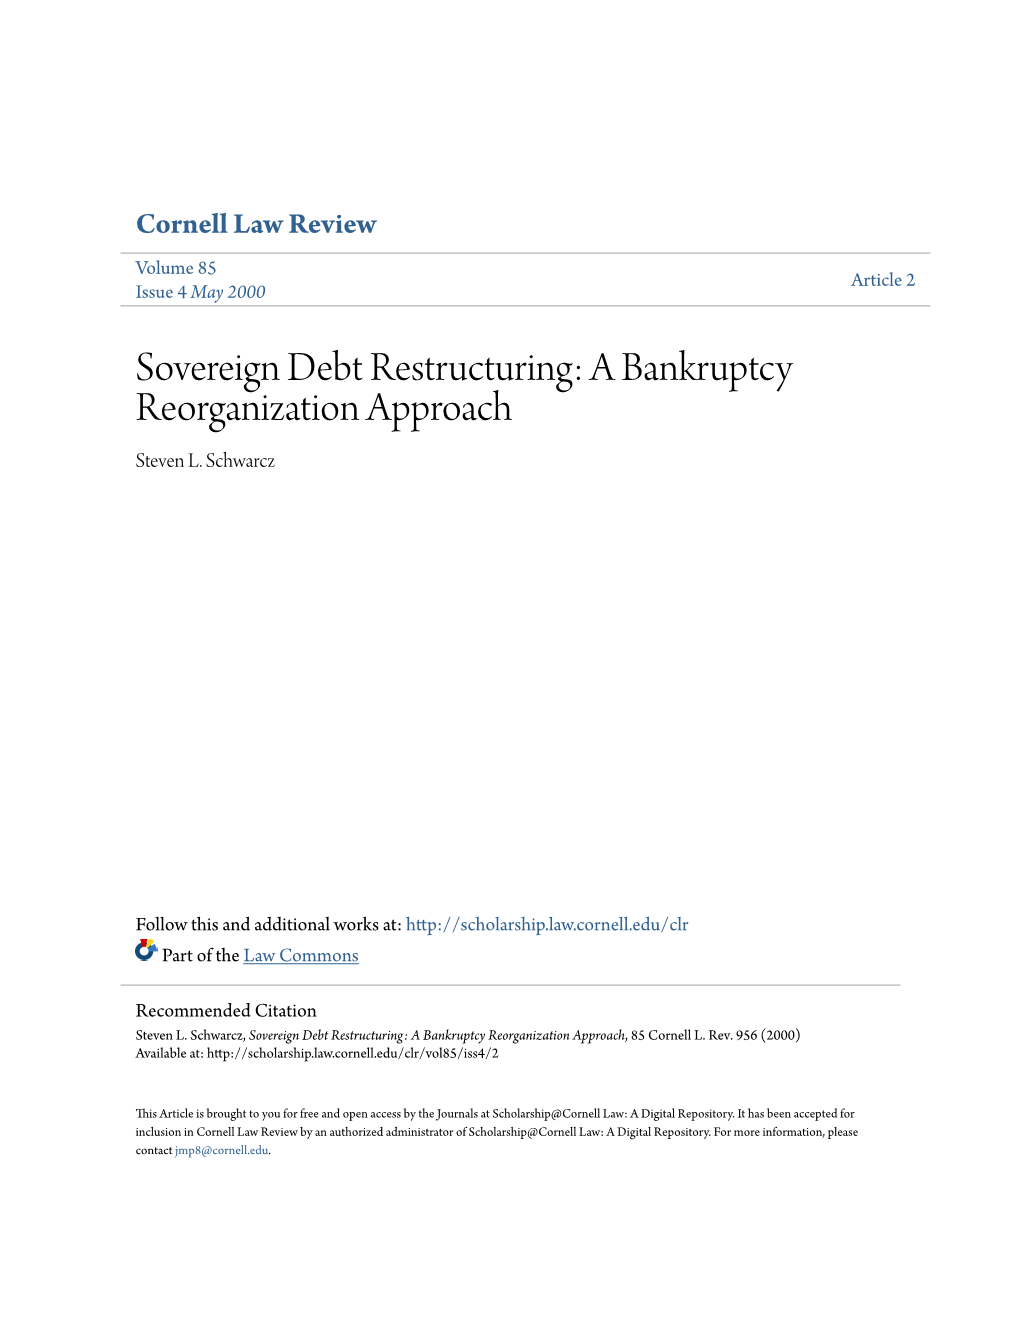 Sovereign Debt Restructuring: a Bankruptcy Reorganization Approach Steven L